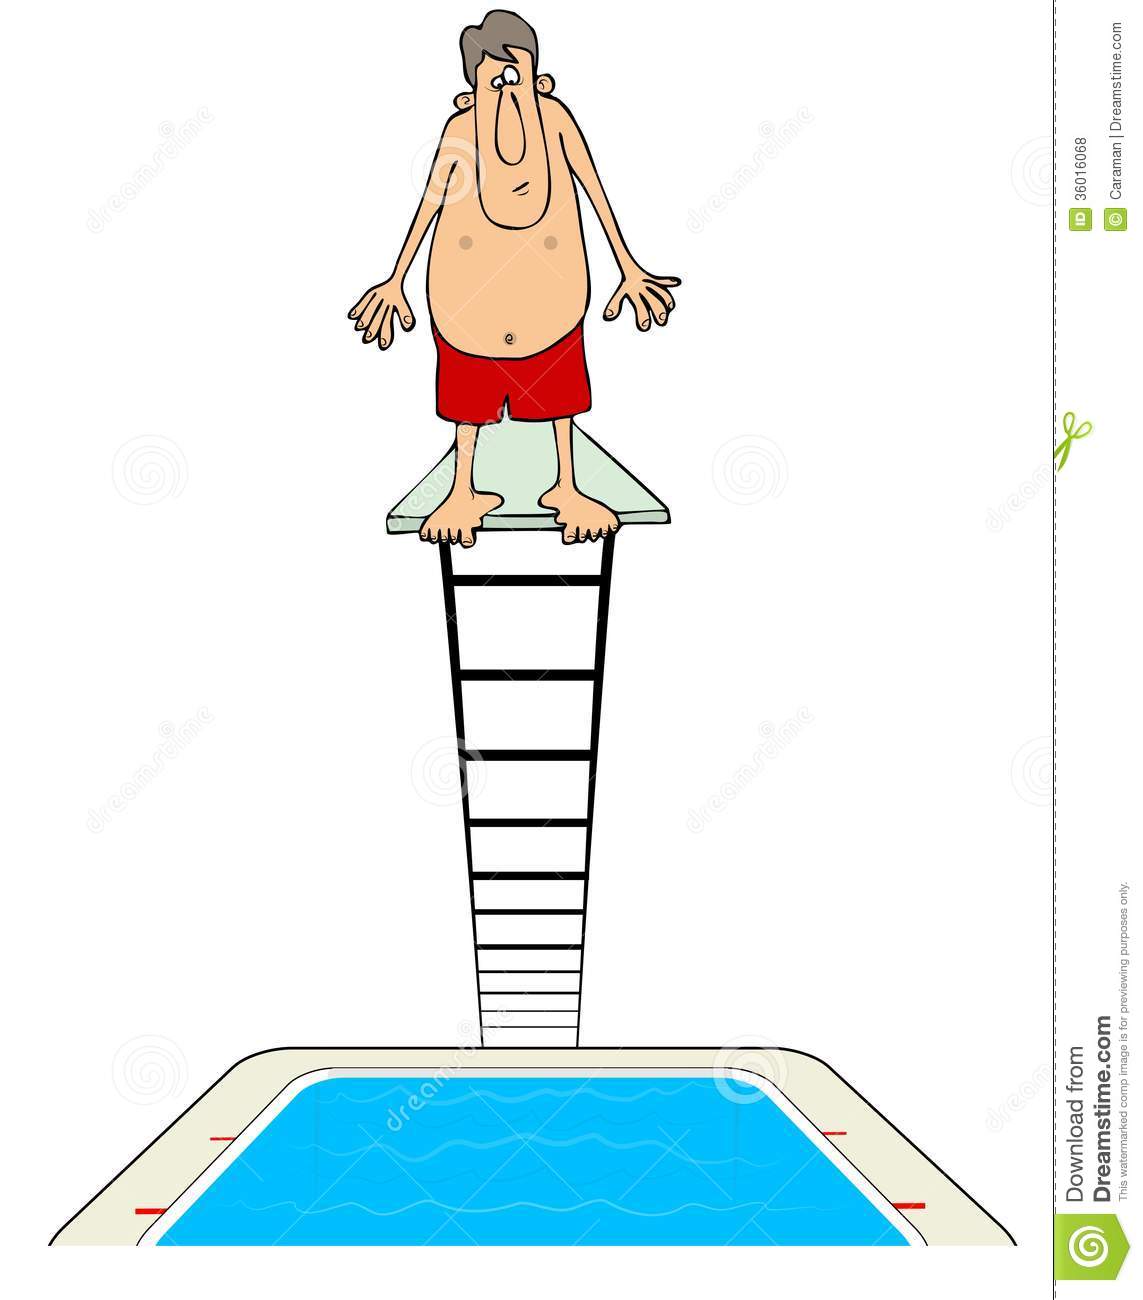 Man On A Diving Board Royalty Free Stock Photos   Image  36016068